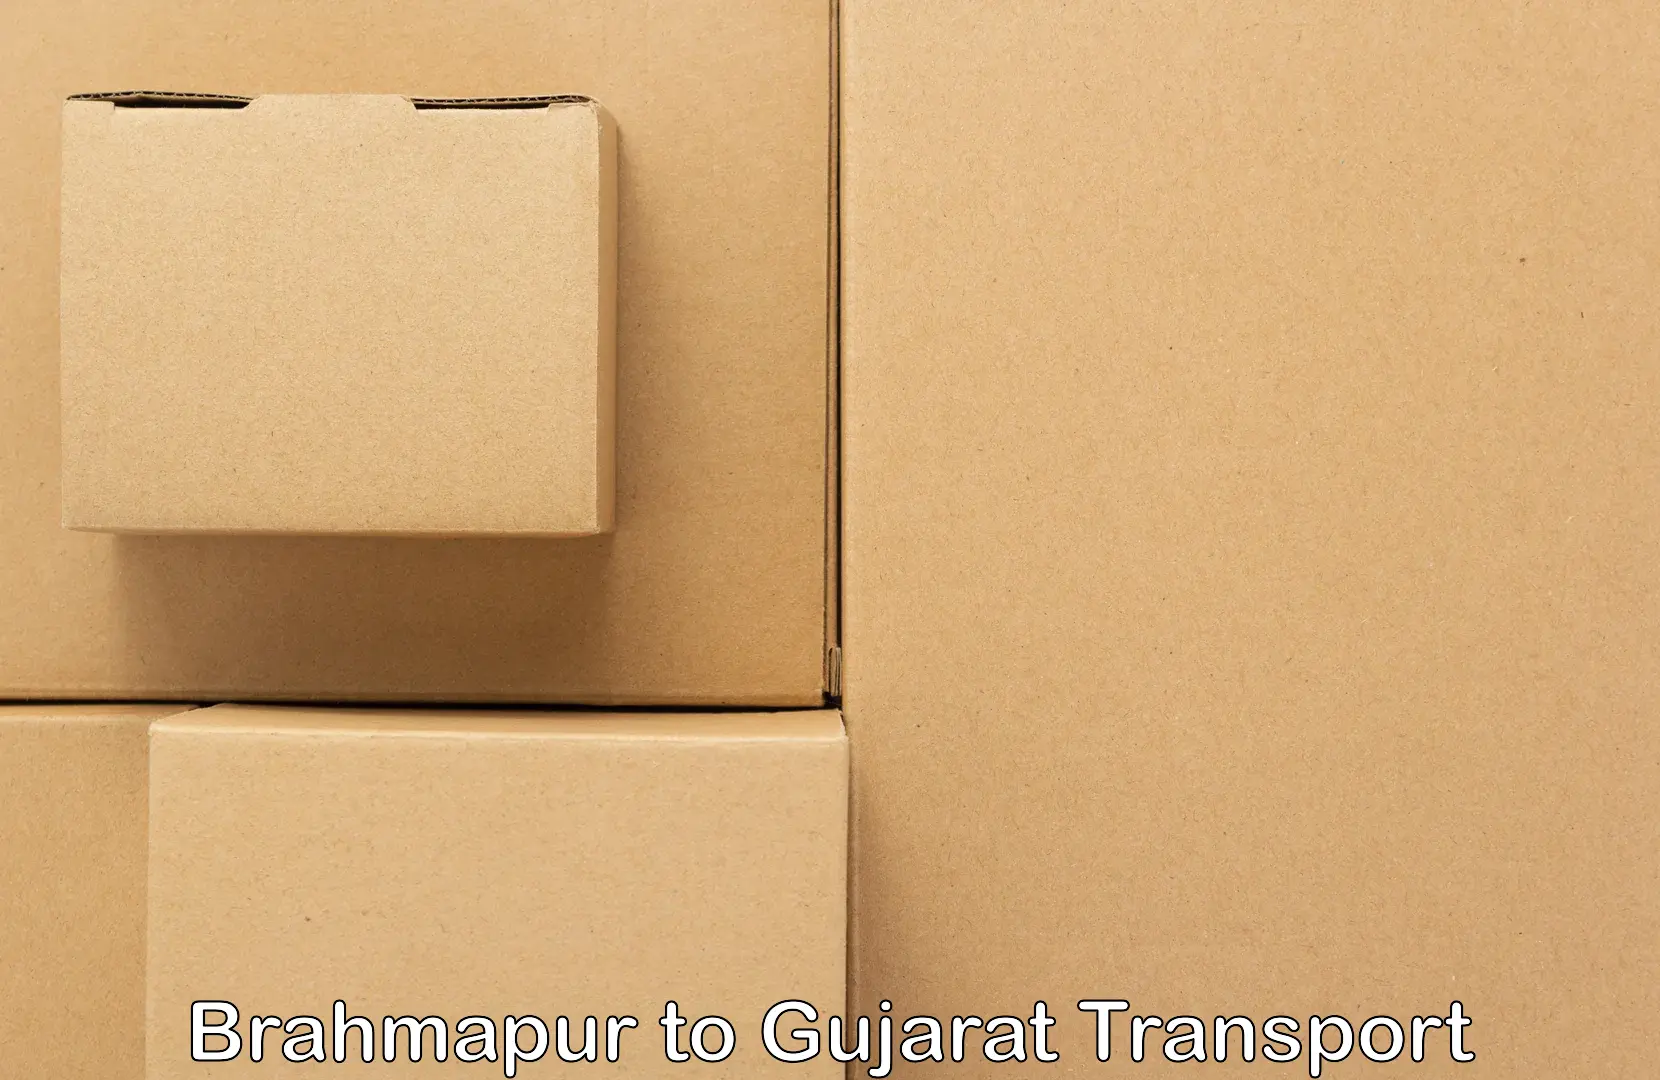 Truck transport companies in India Brahmapur to Hansot